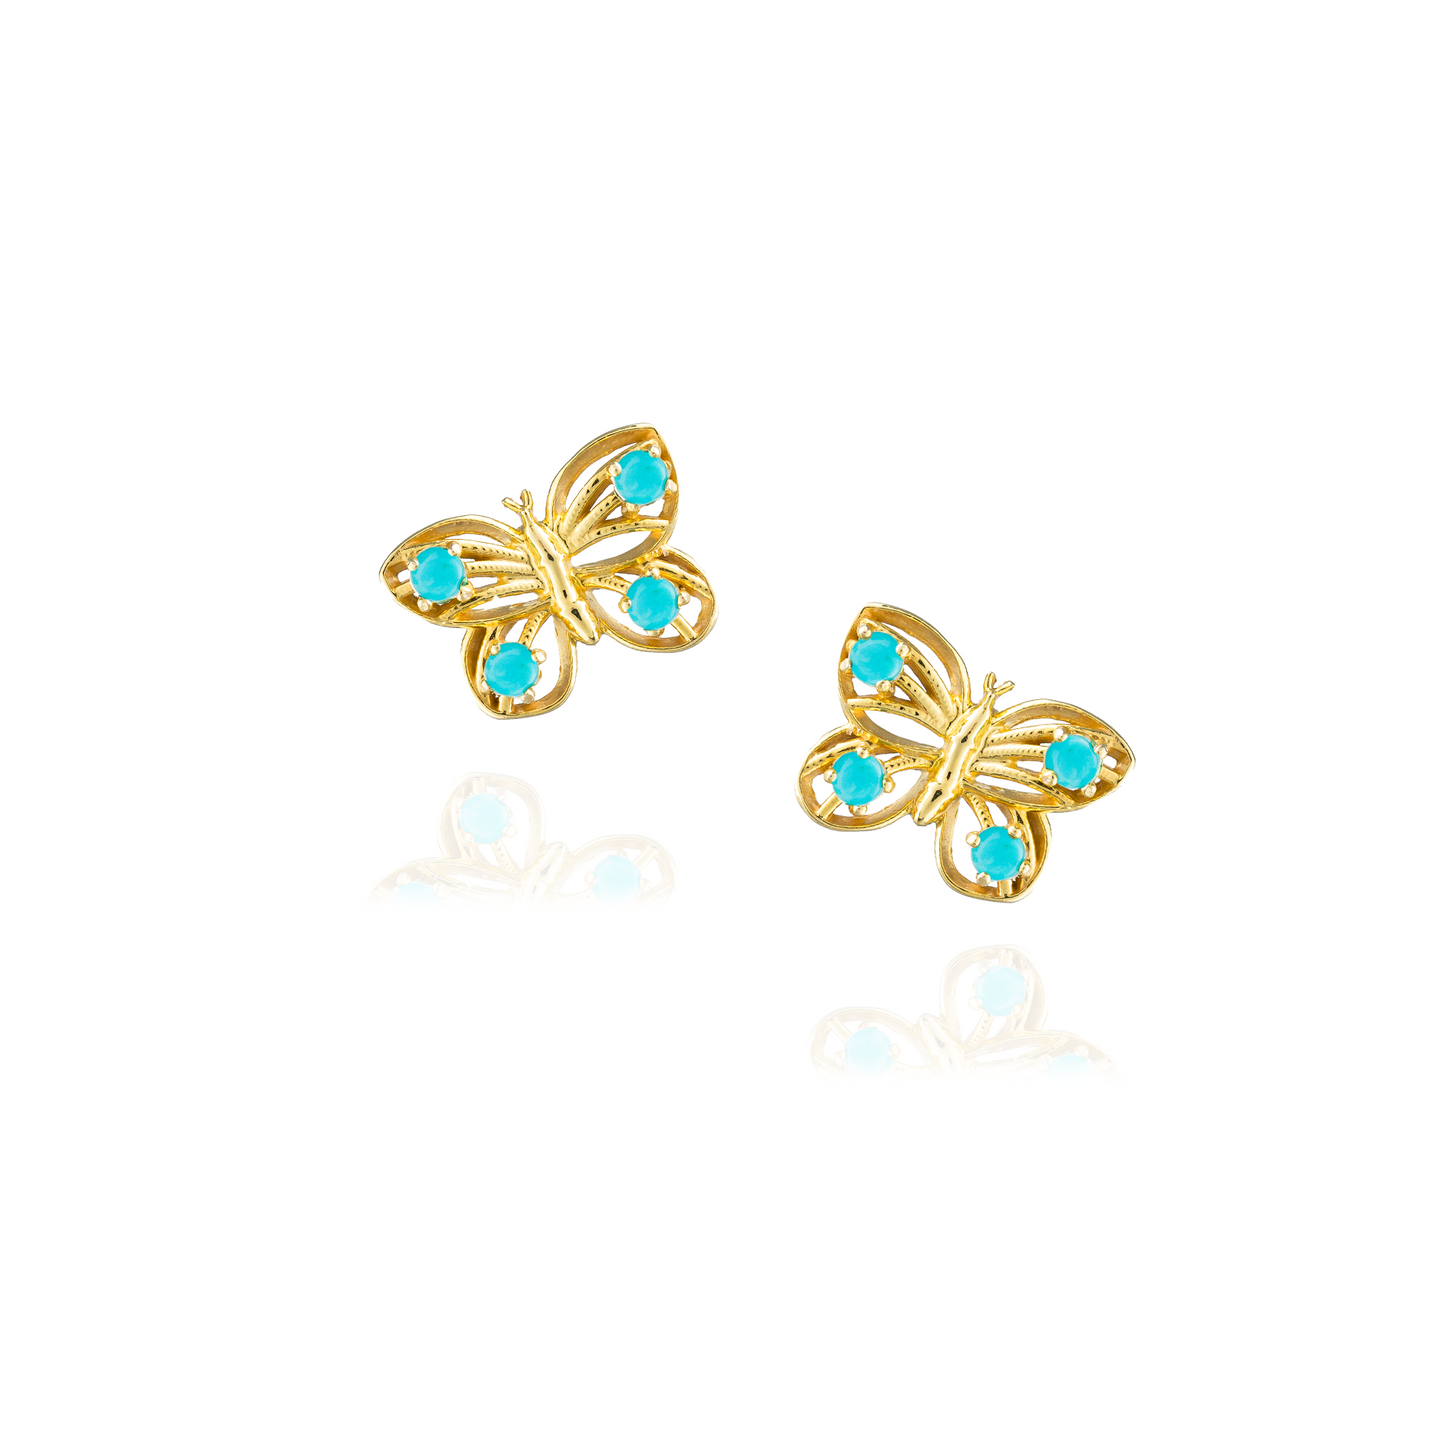 925 Silver Gold Plated 18KT Earrings with Turquoise